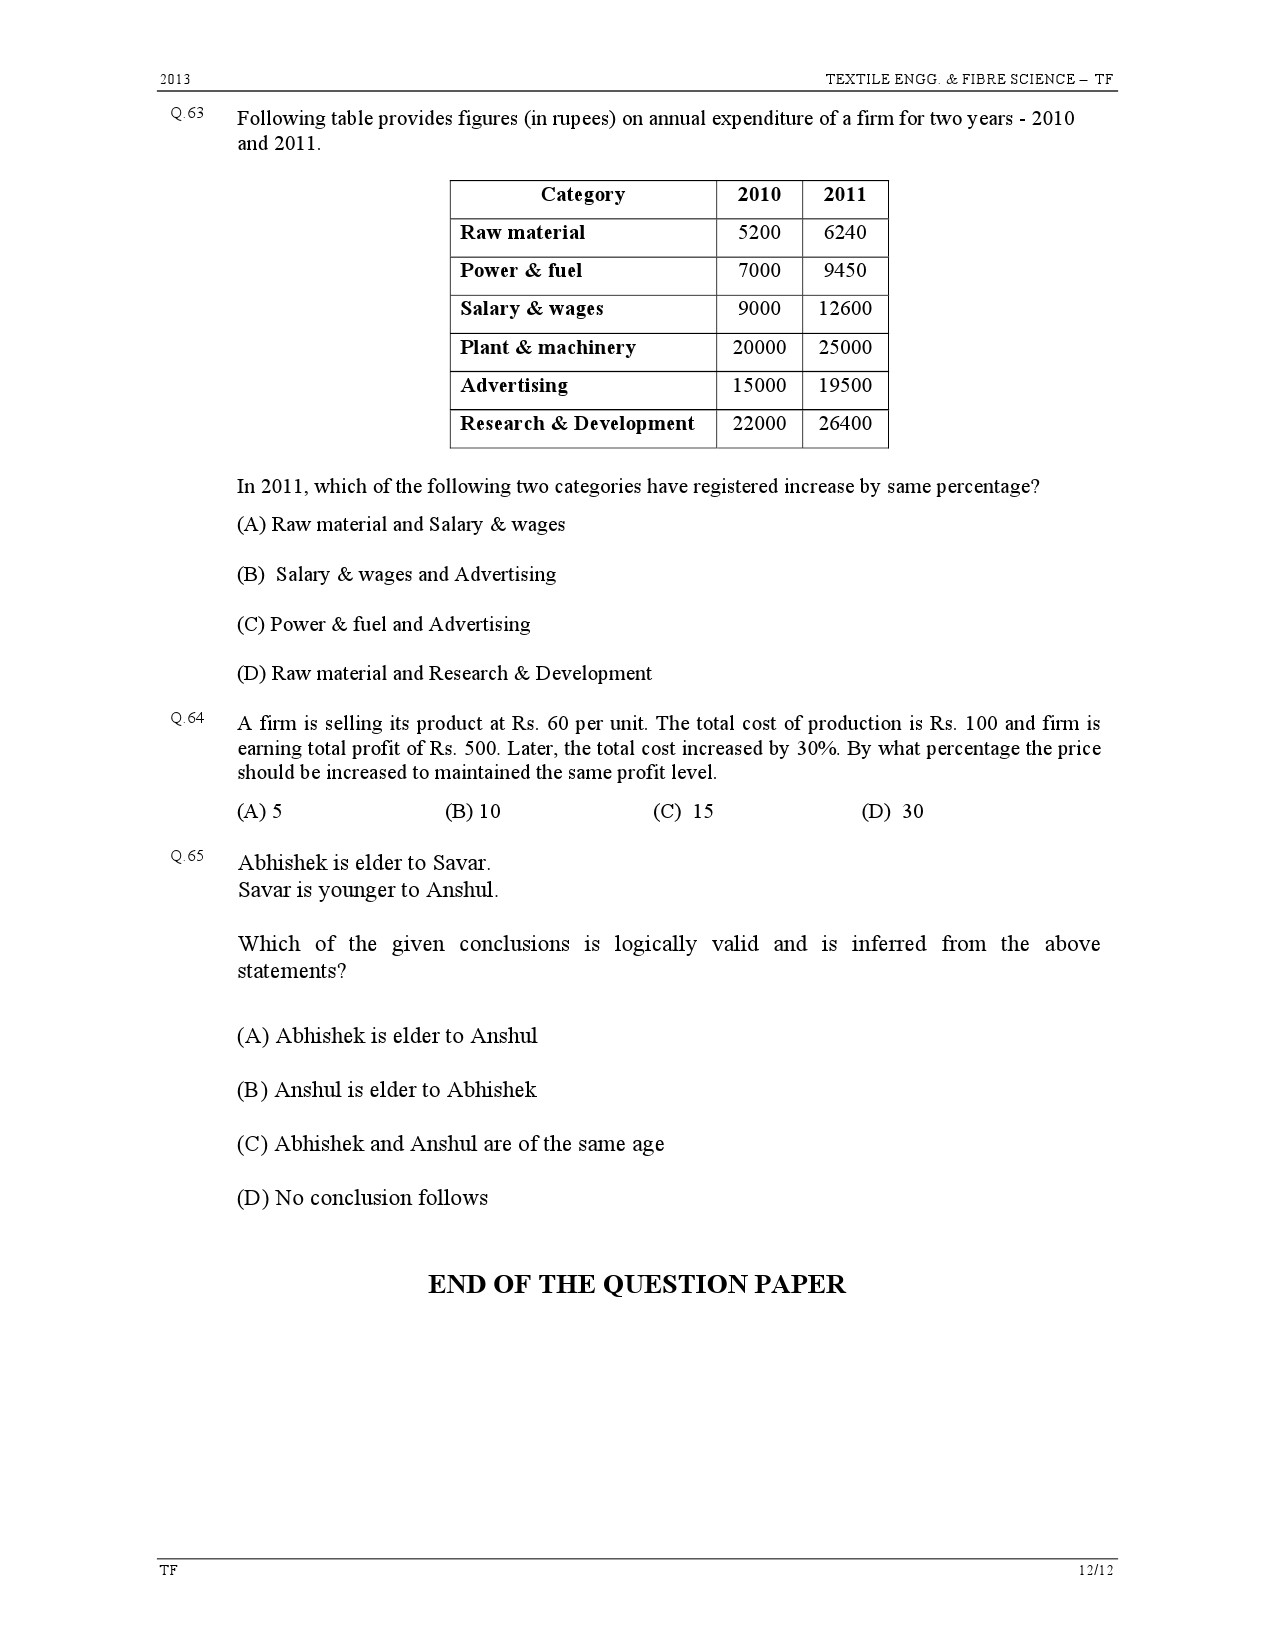 GATE Exam Question Paper 2013 Textile Engineering and Fibre Science 12